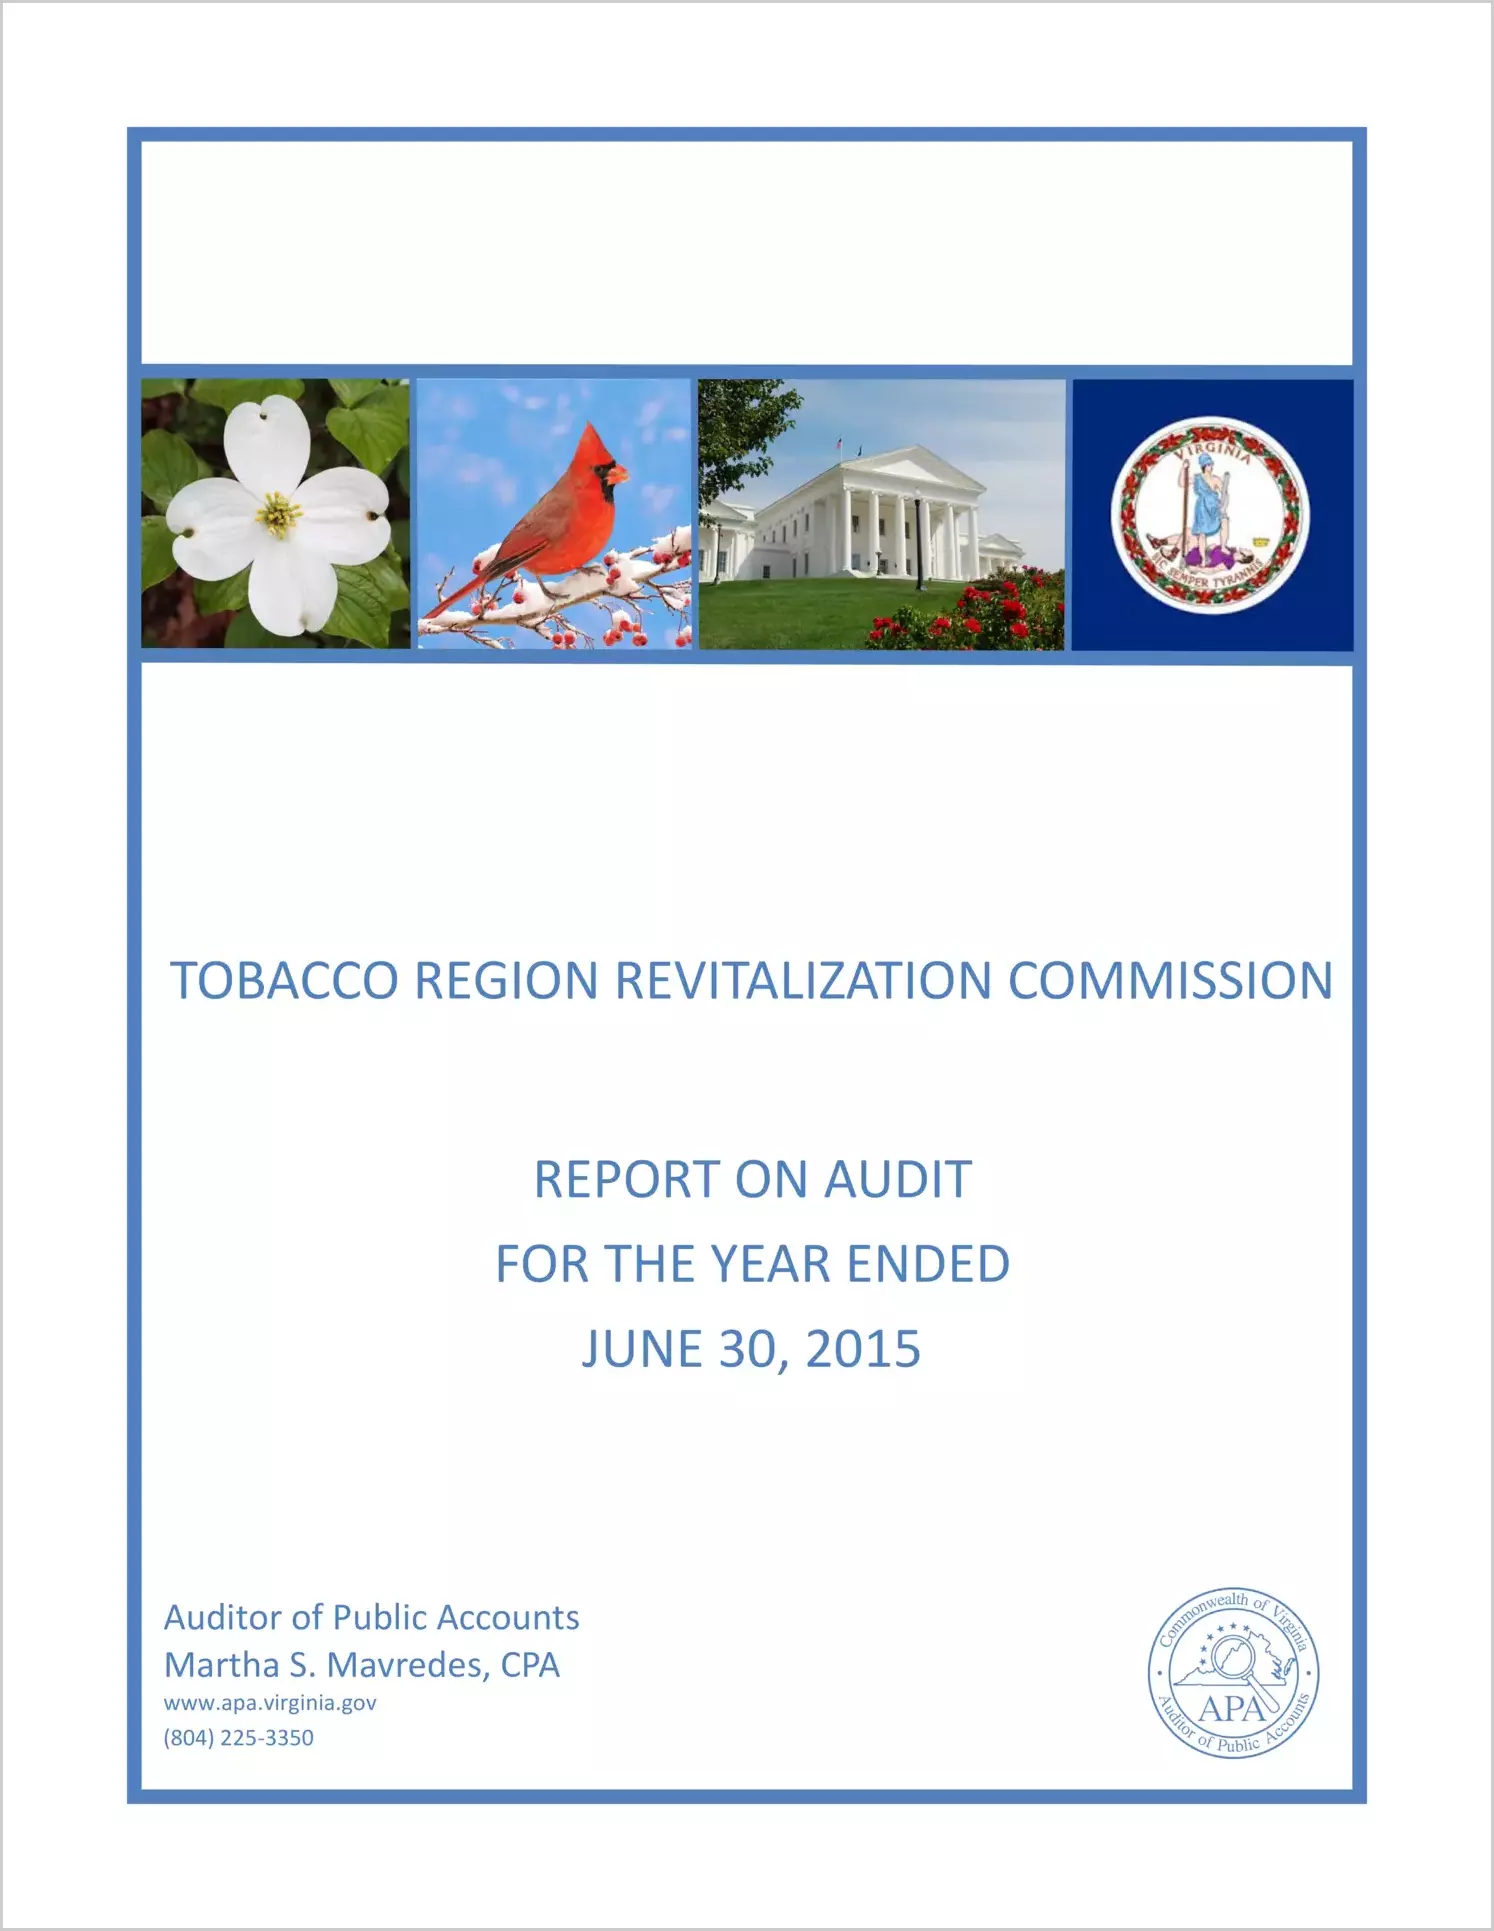 Tobacco Region Revitalization Commission Report on Audit for the Year Ended June 30, 2015